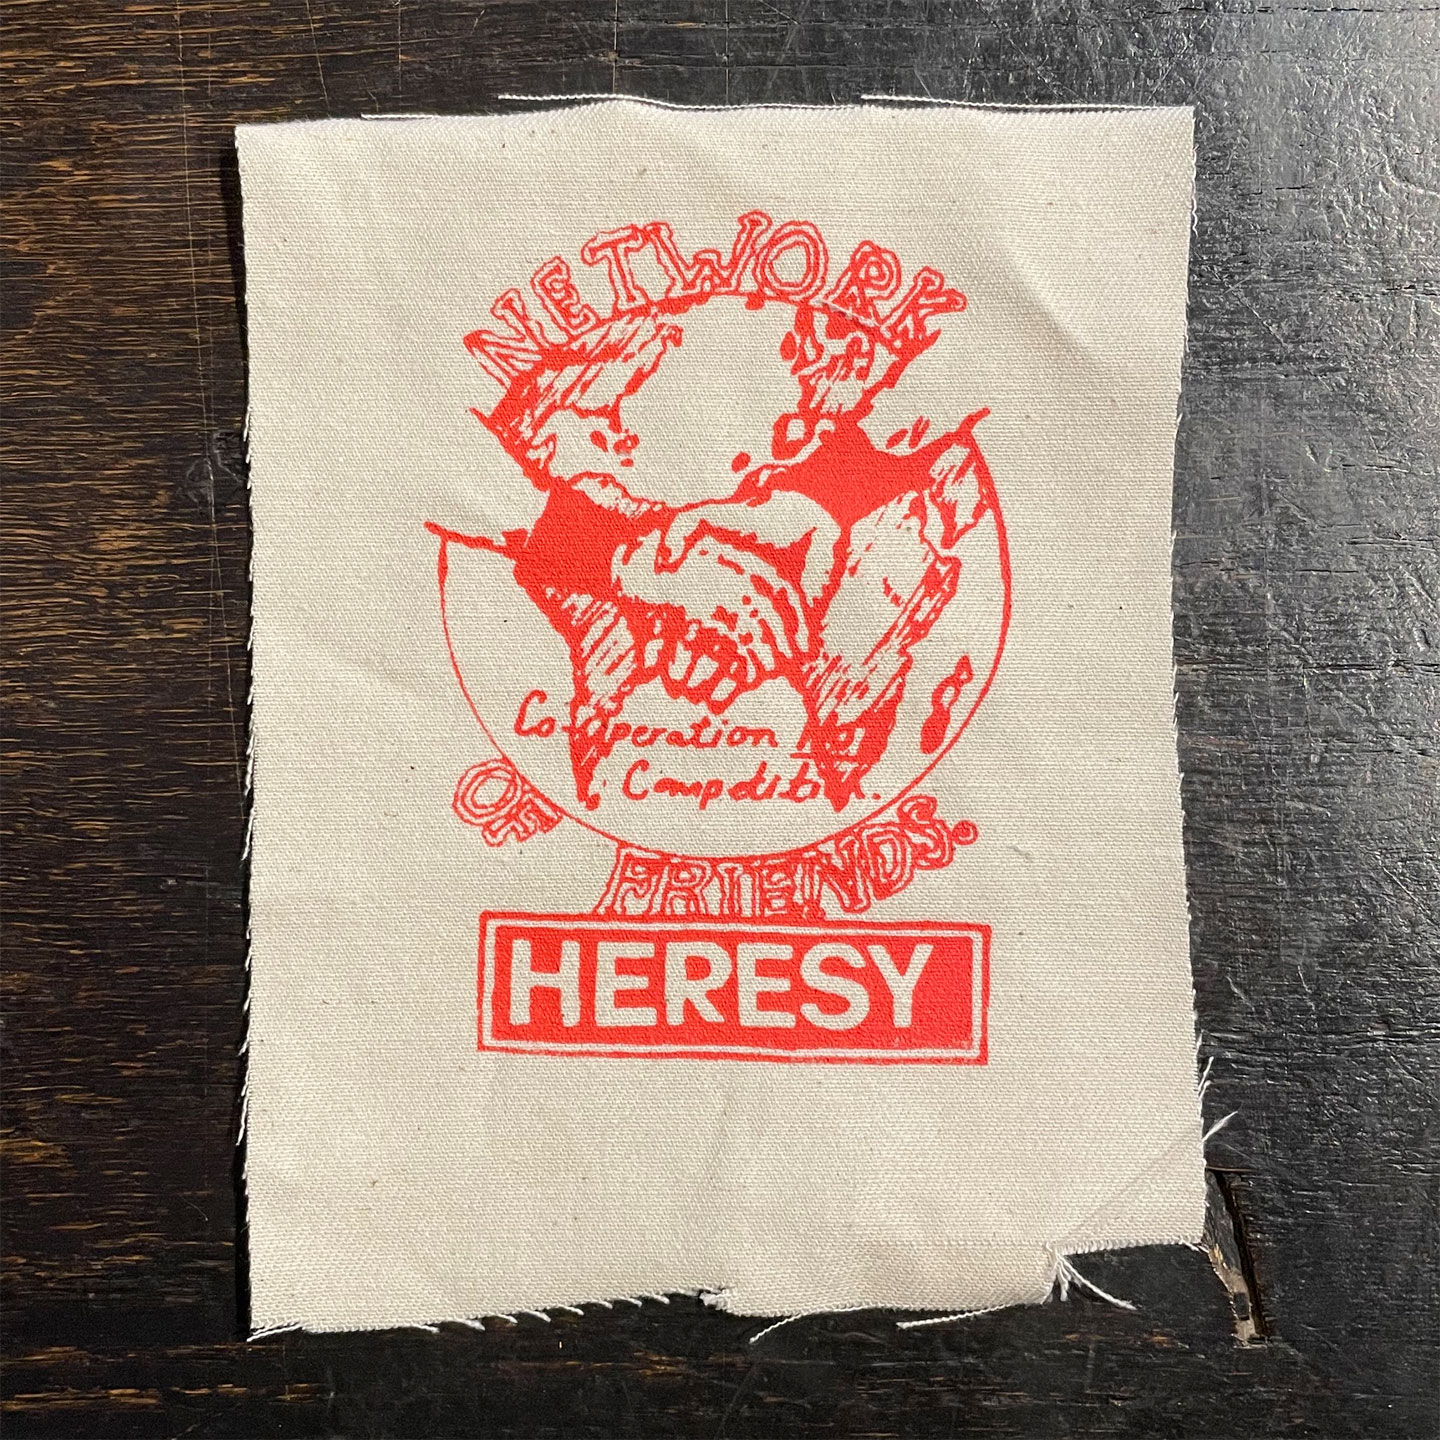 HERESY PATCH NETWORK OF FRIENDS